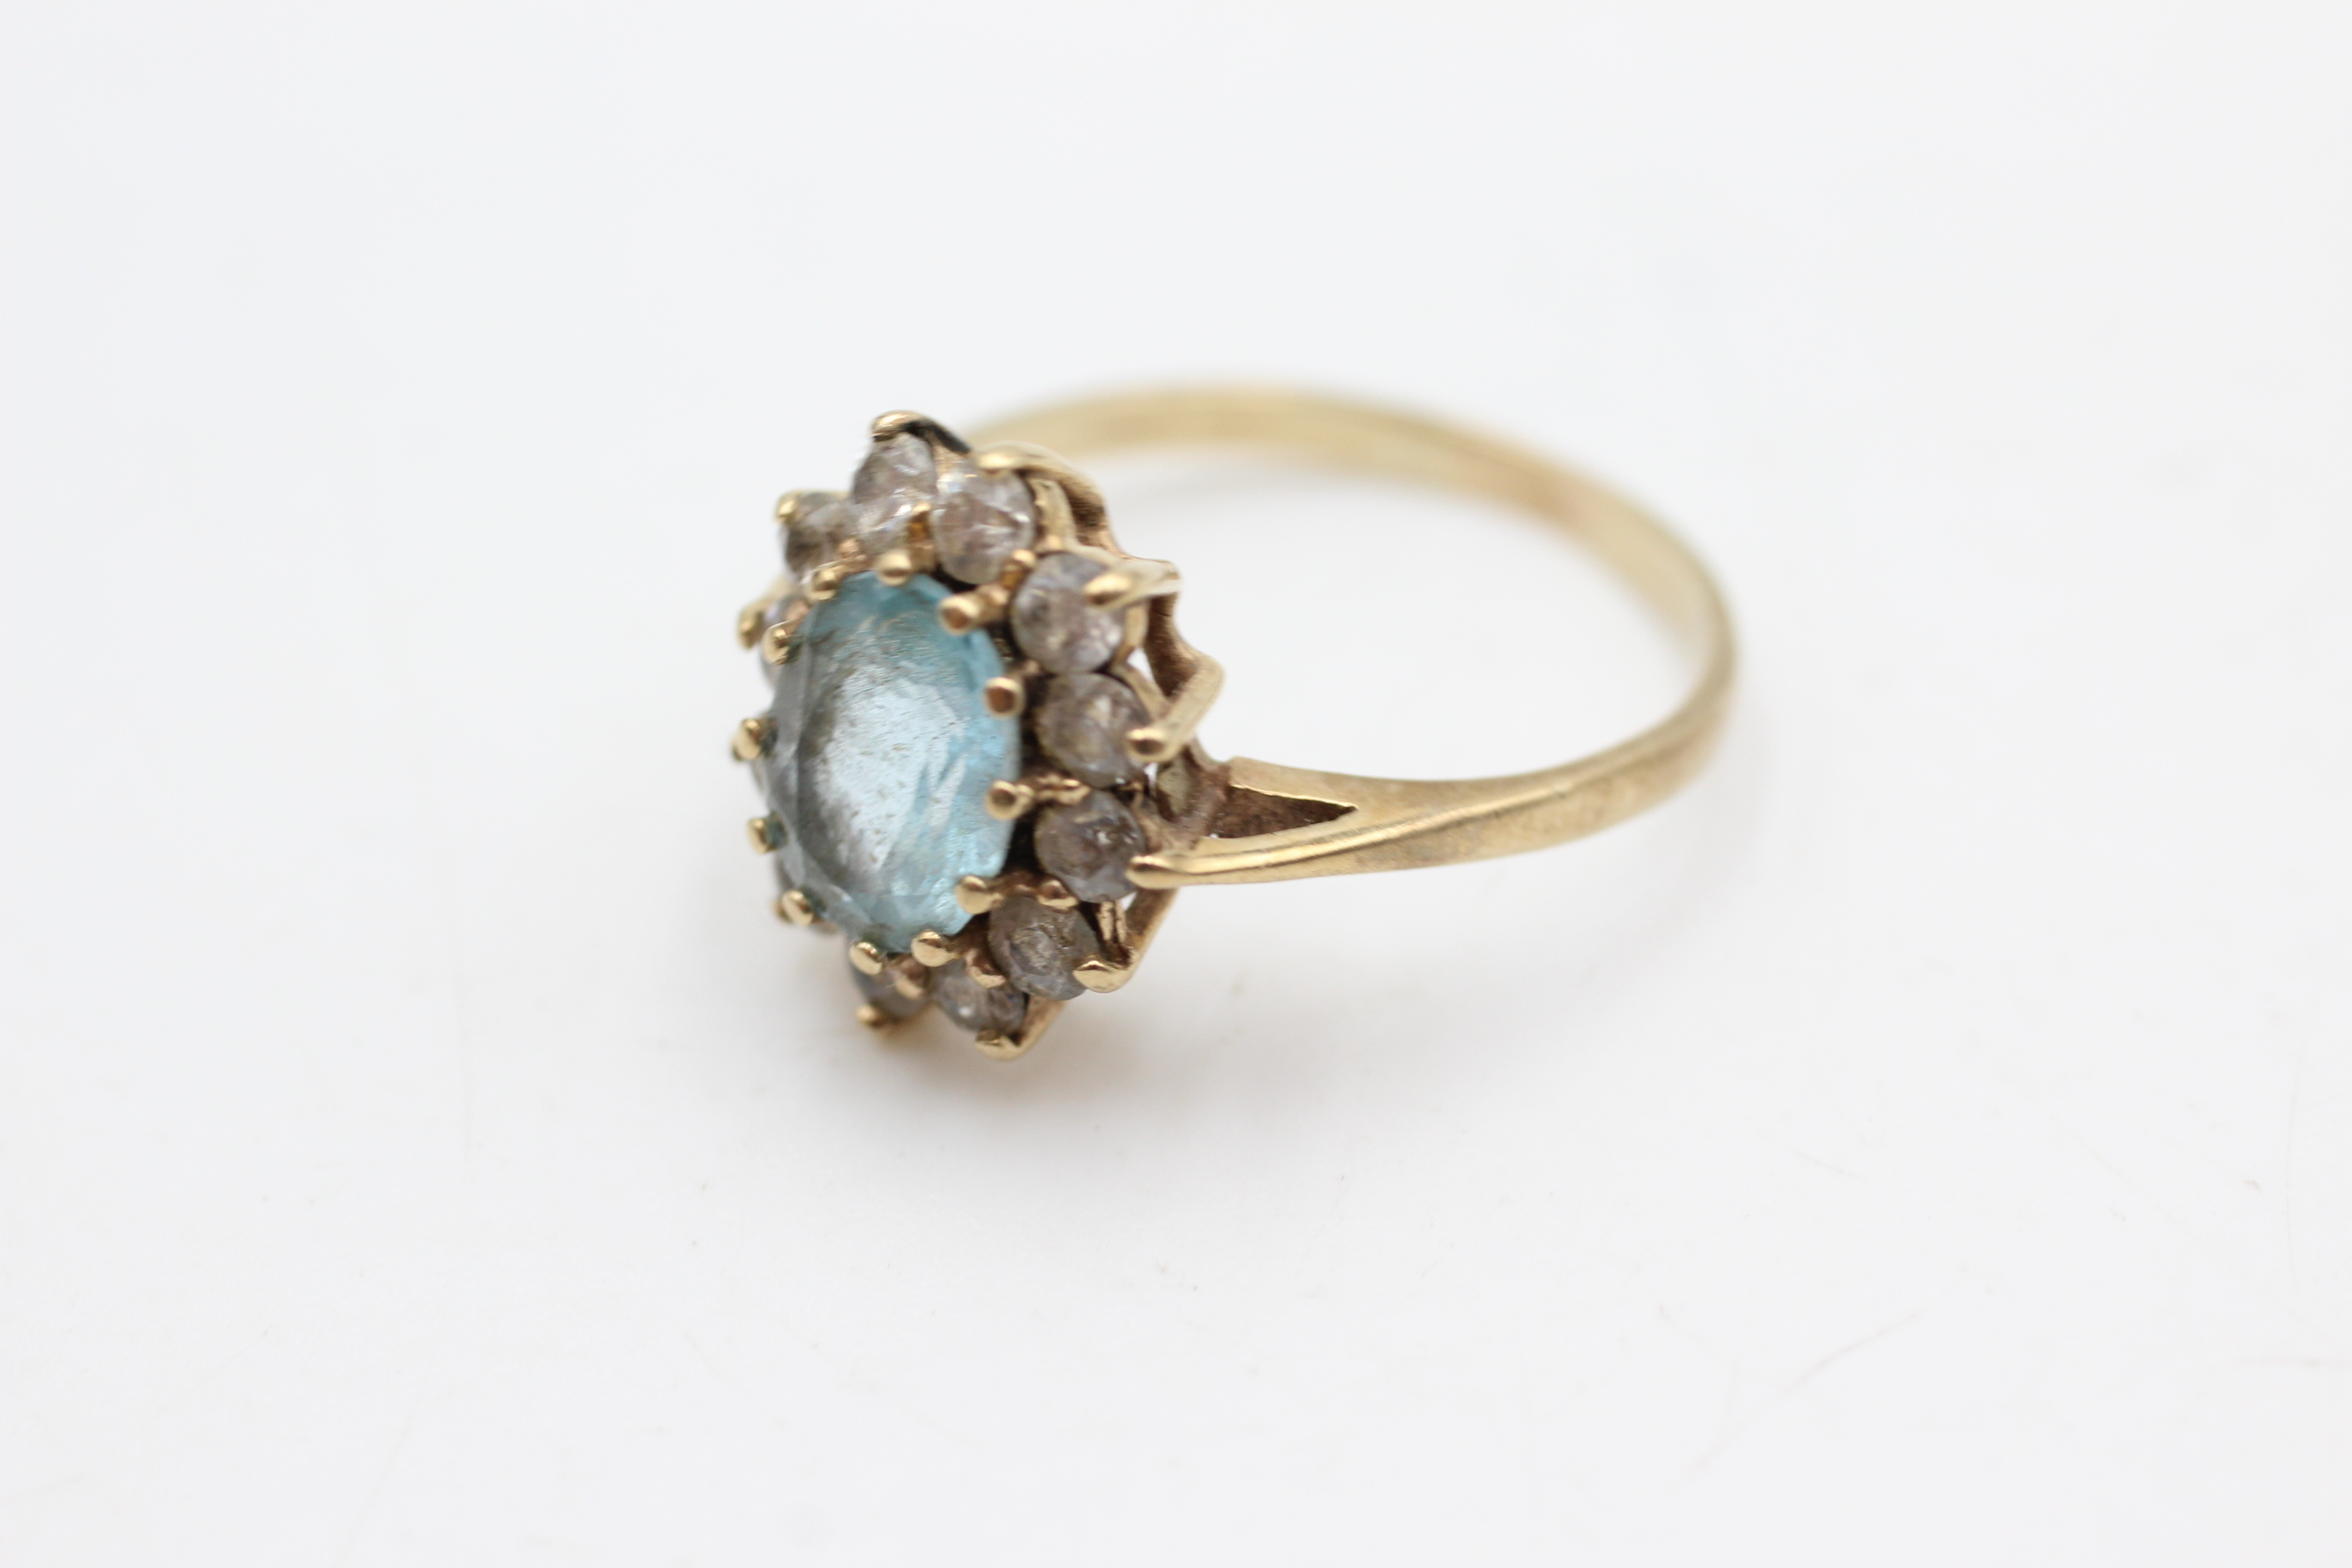 9ct gold blue topaz & clear gemstone halo dress ring (3.4g) - Image 3 of 4